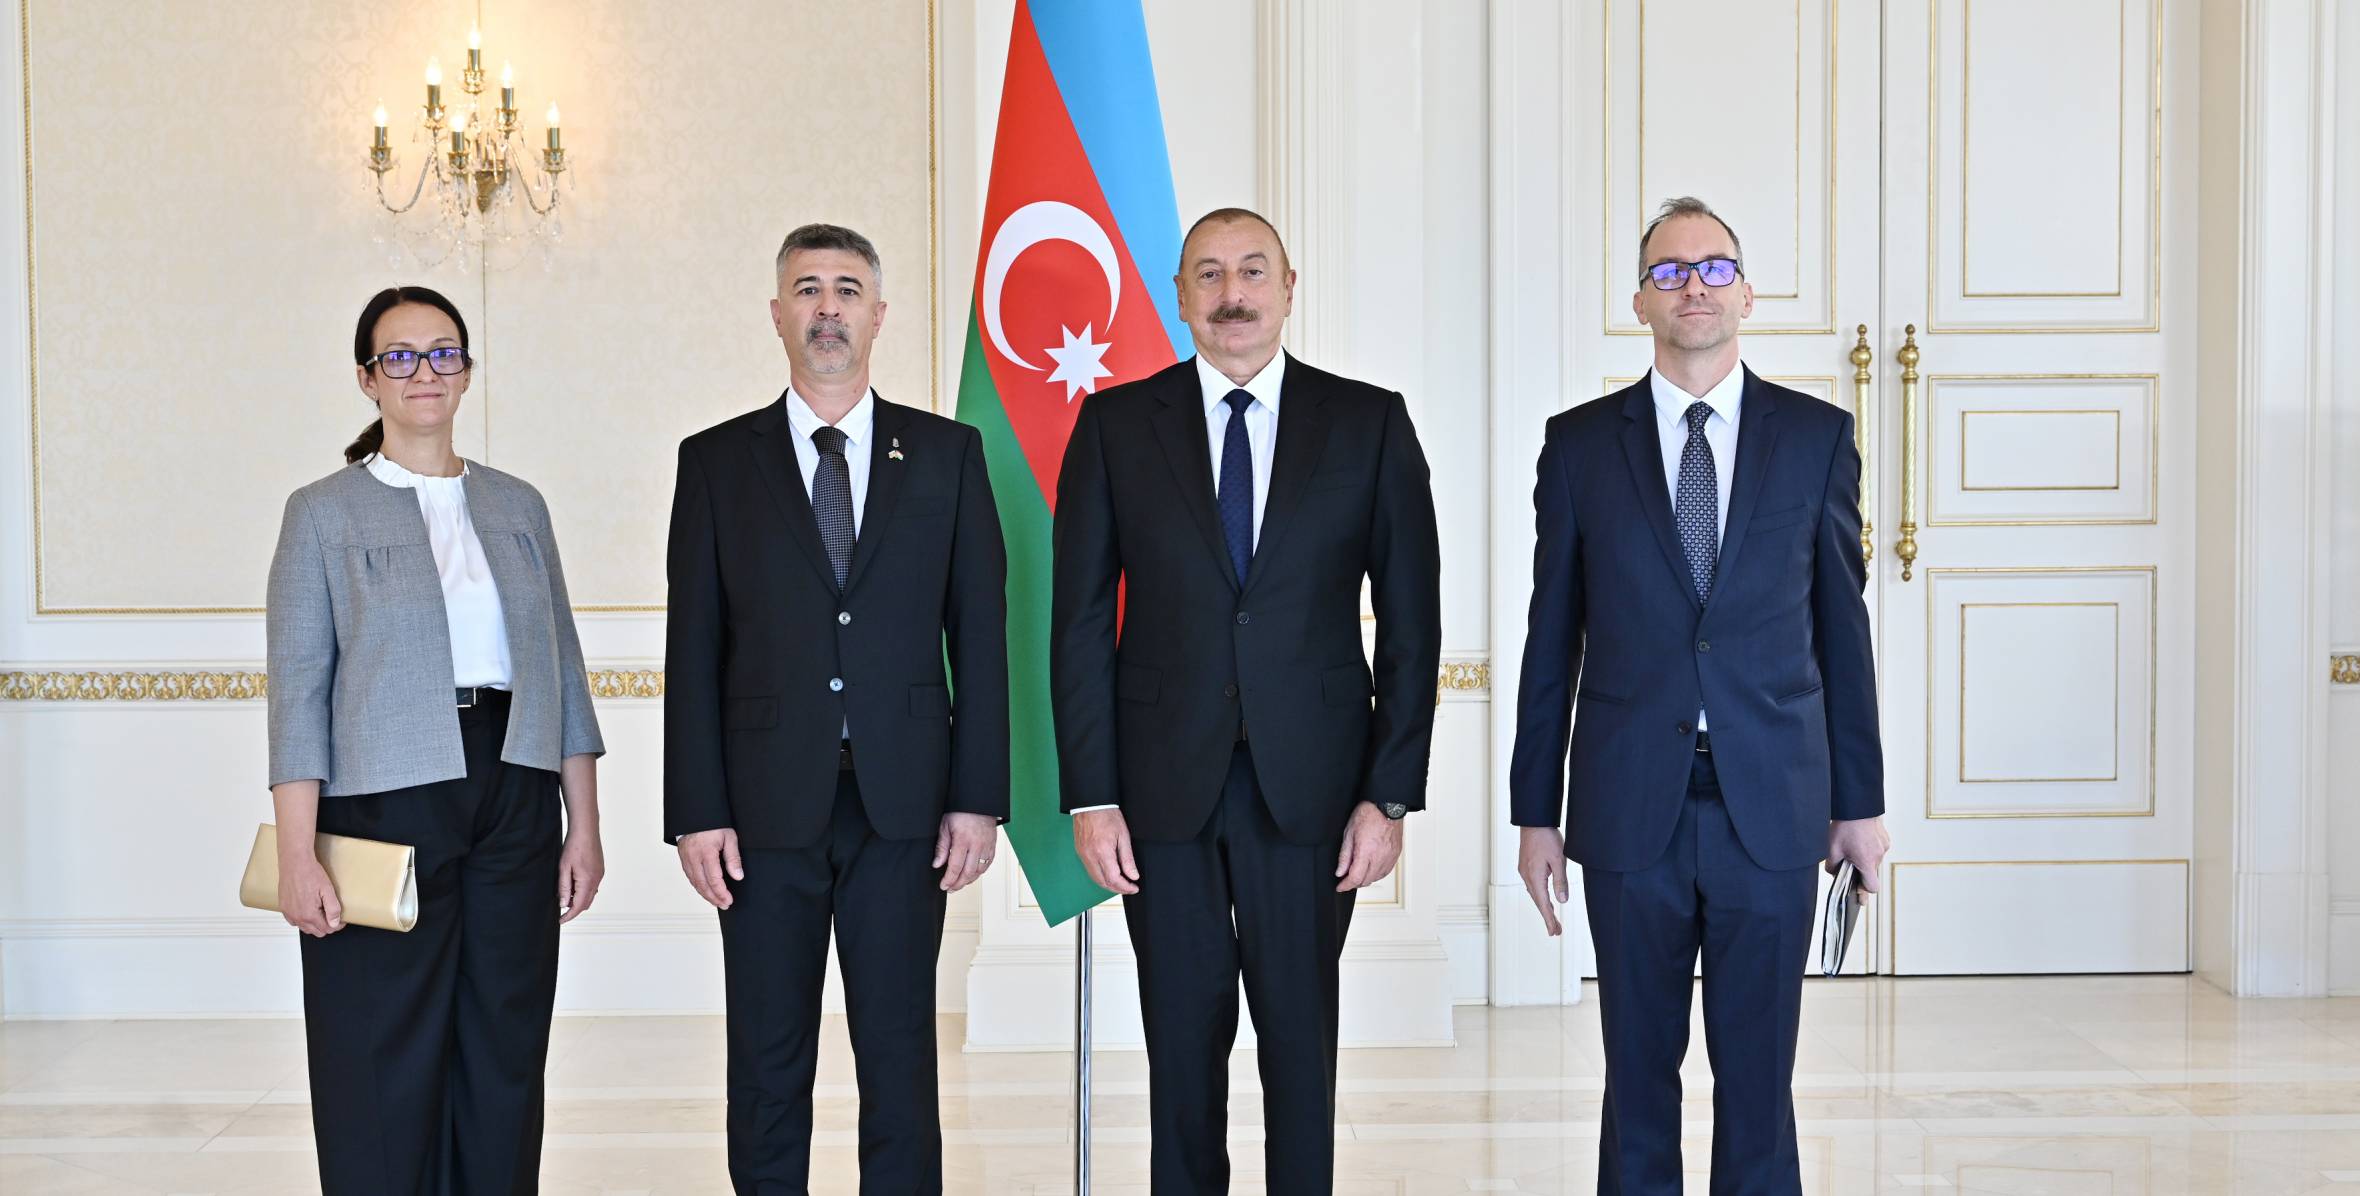 Ilham Aliyev accepted the credentials of the incoming ambassador of Hungary